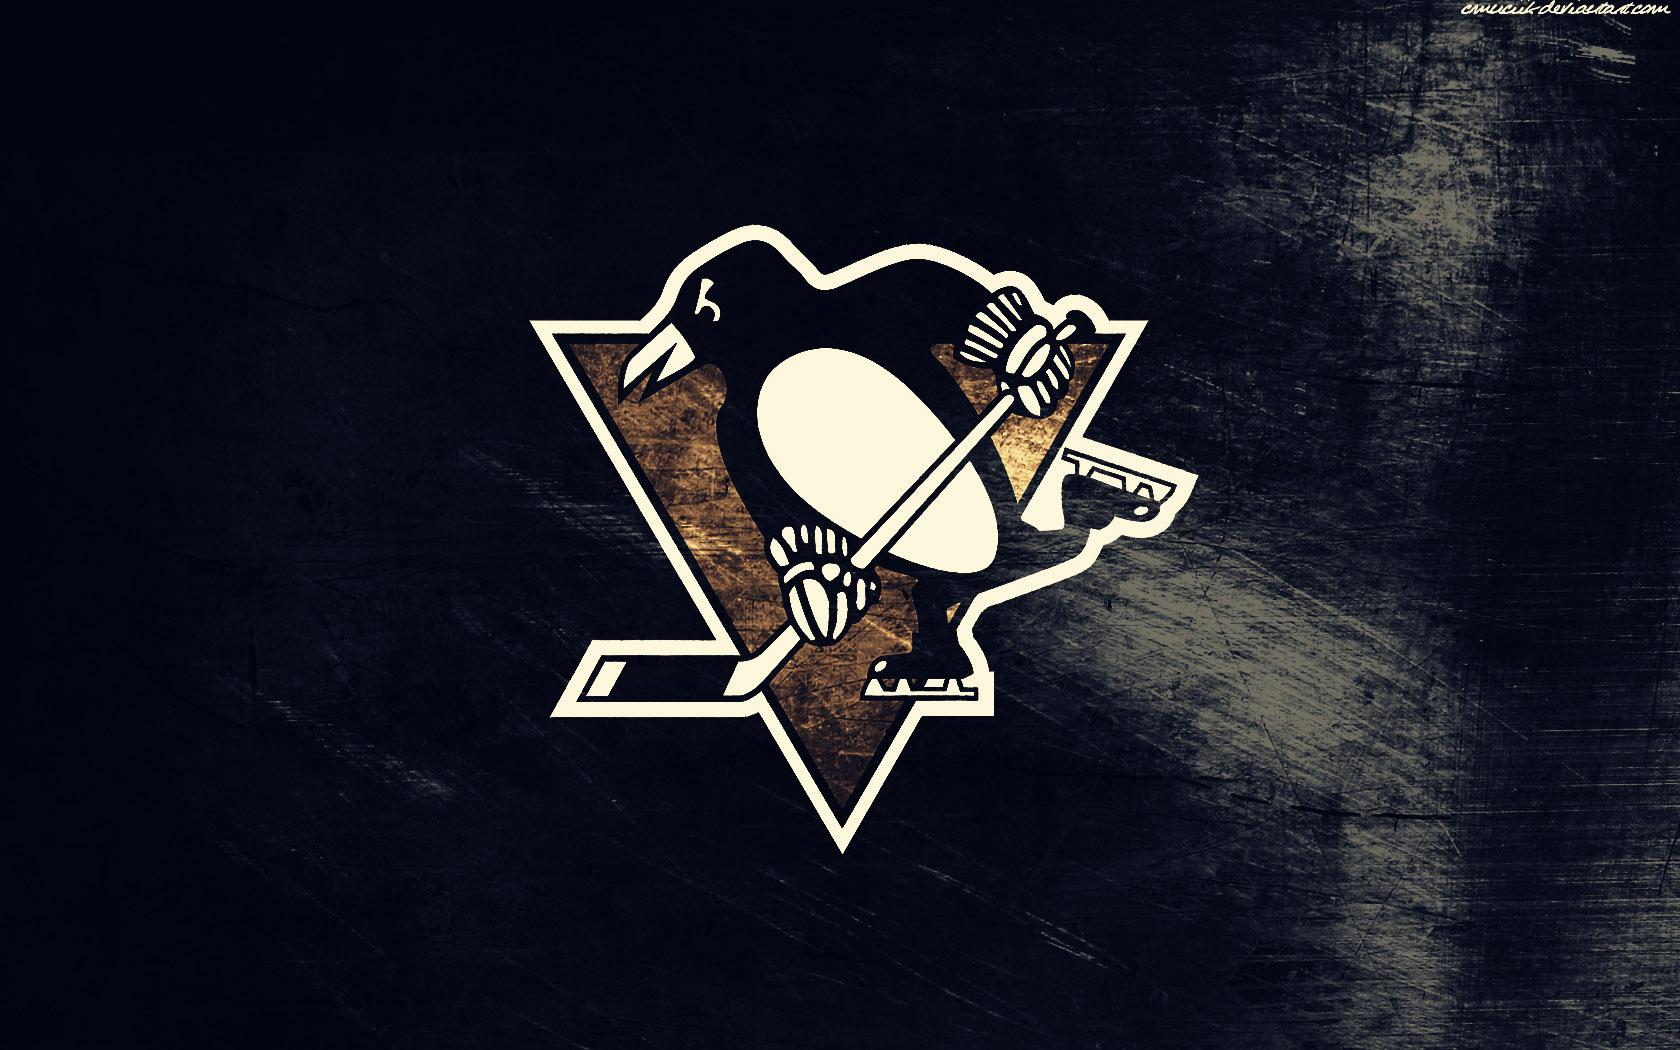 Hope you like this Pittsburgh Penguins HD background as much as we do!